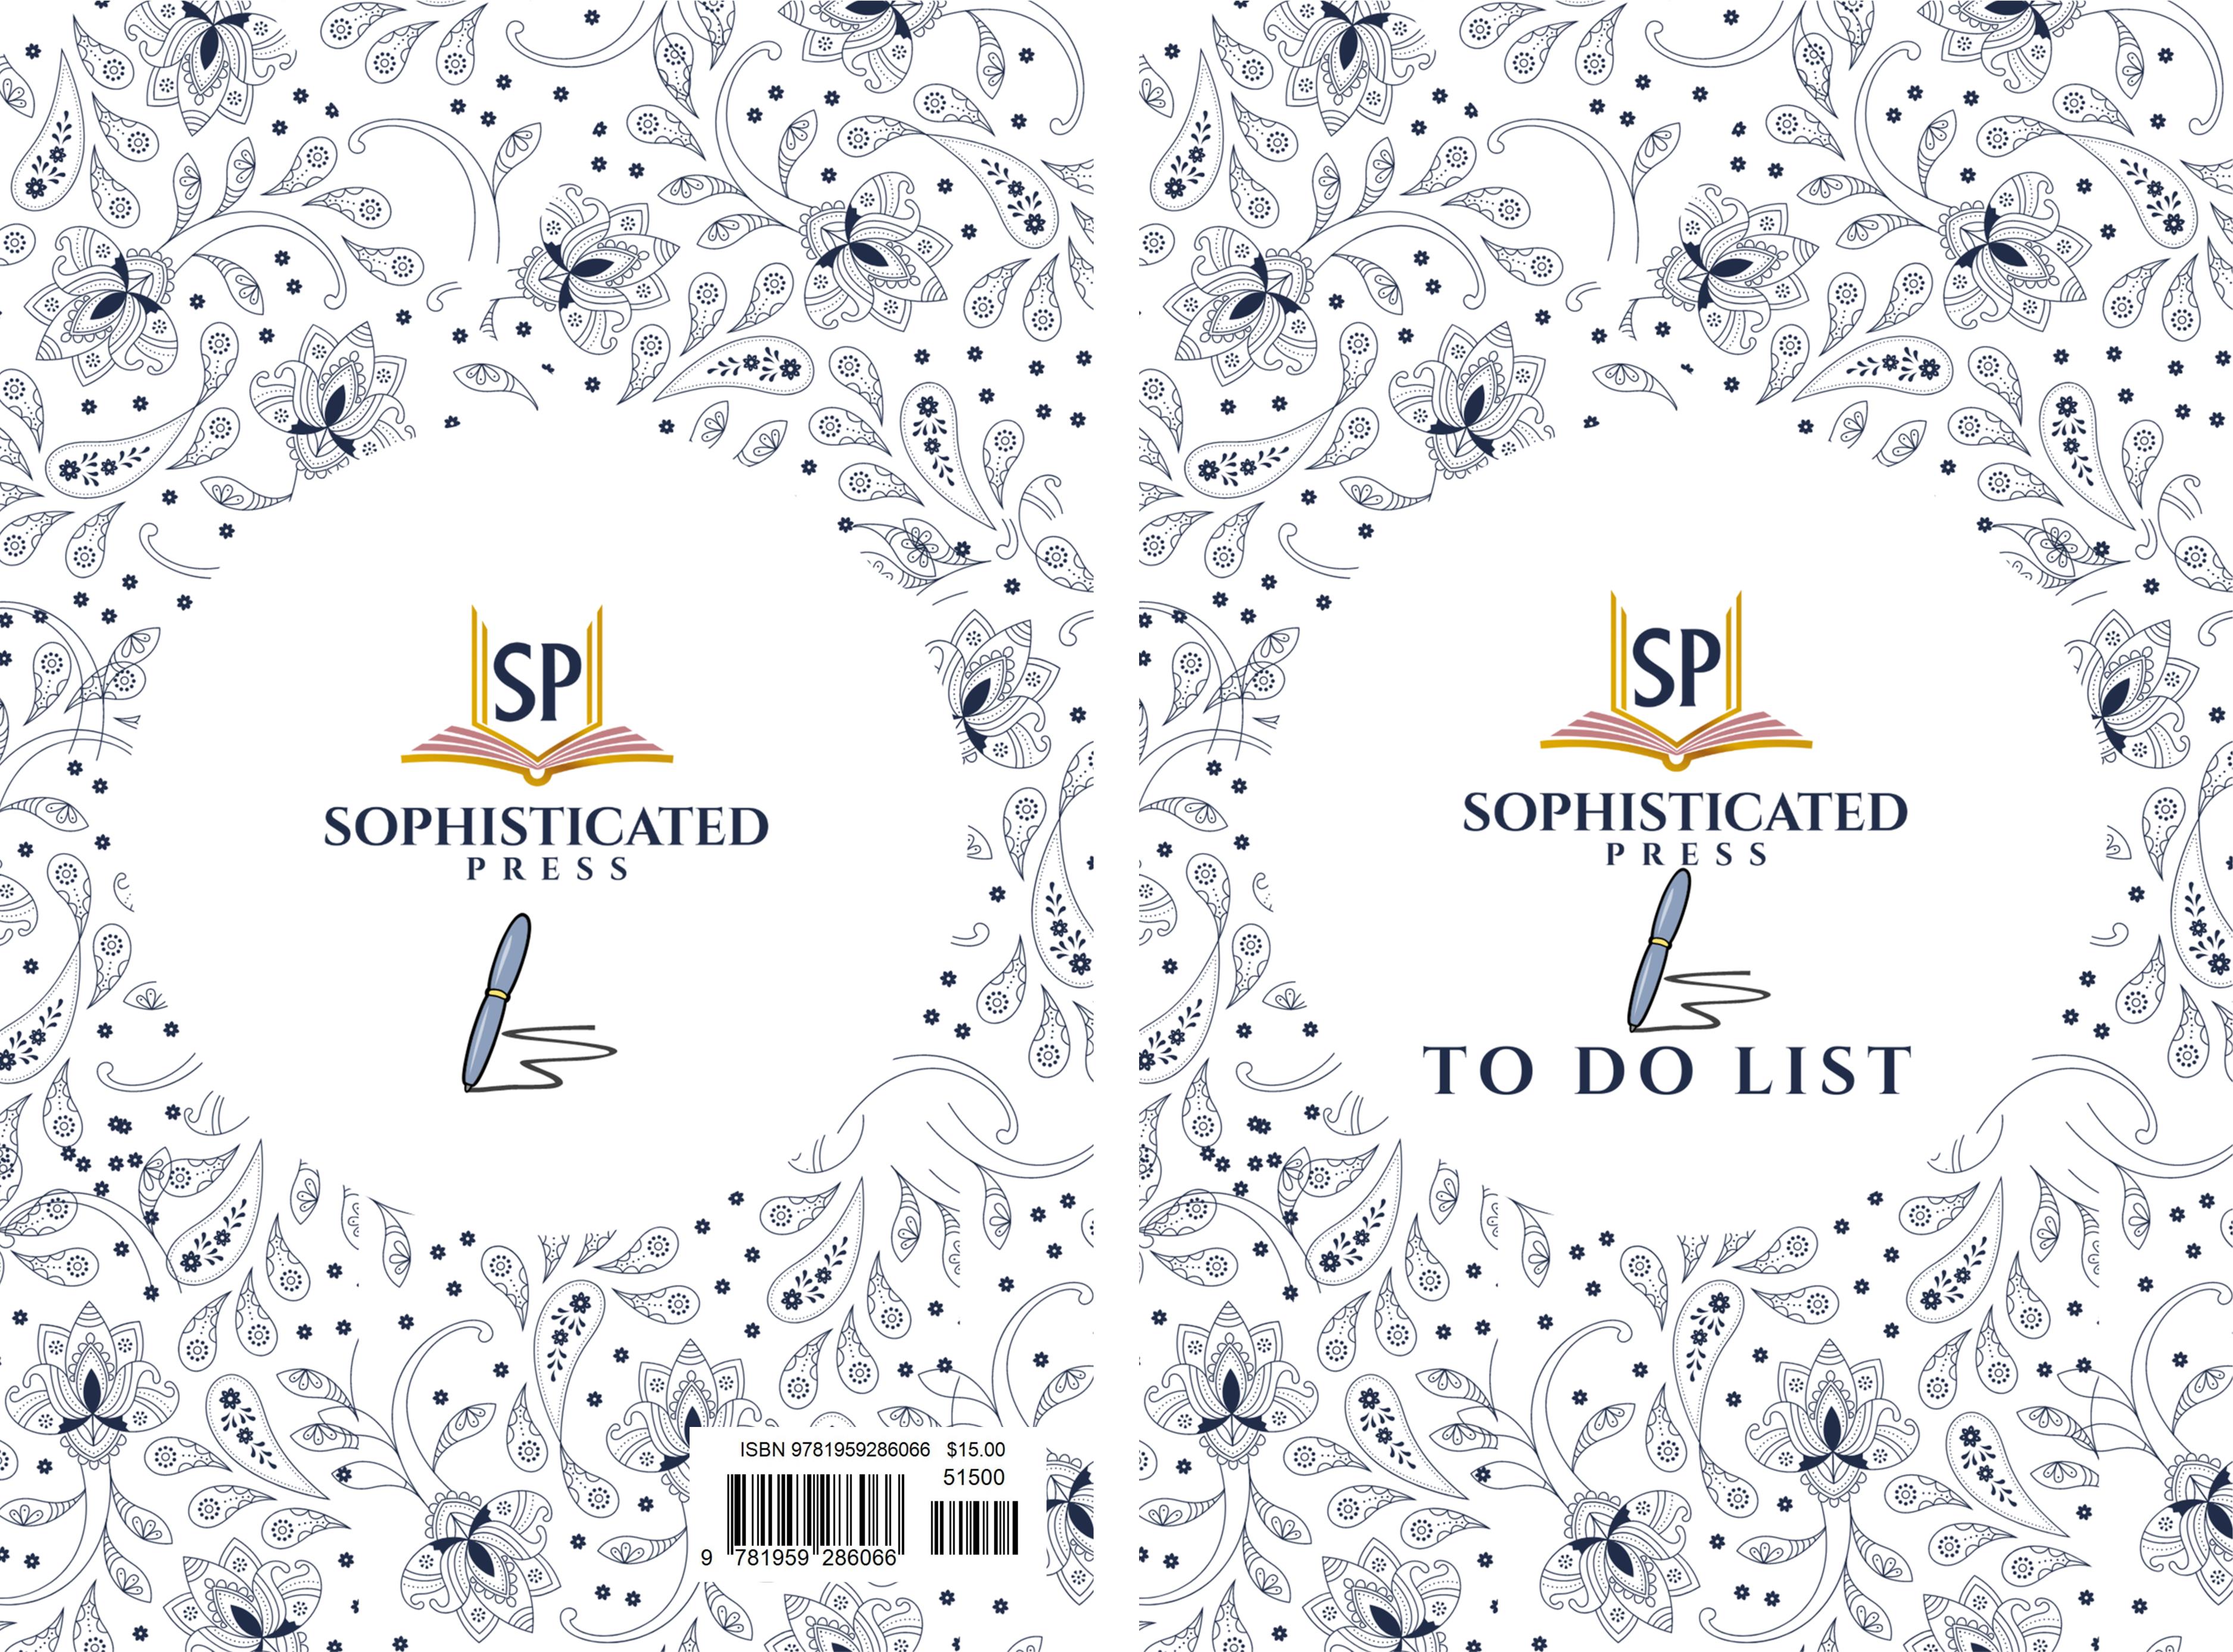 Sophisticated Press Blue Paisley To Do List Booklet cover image